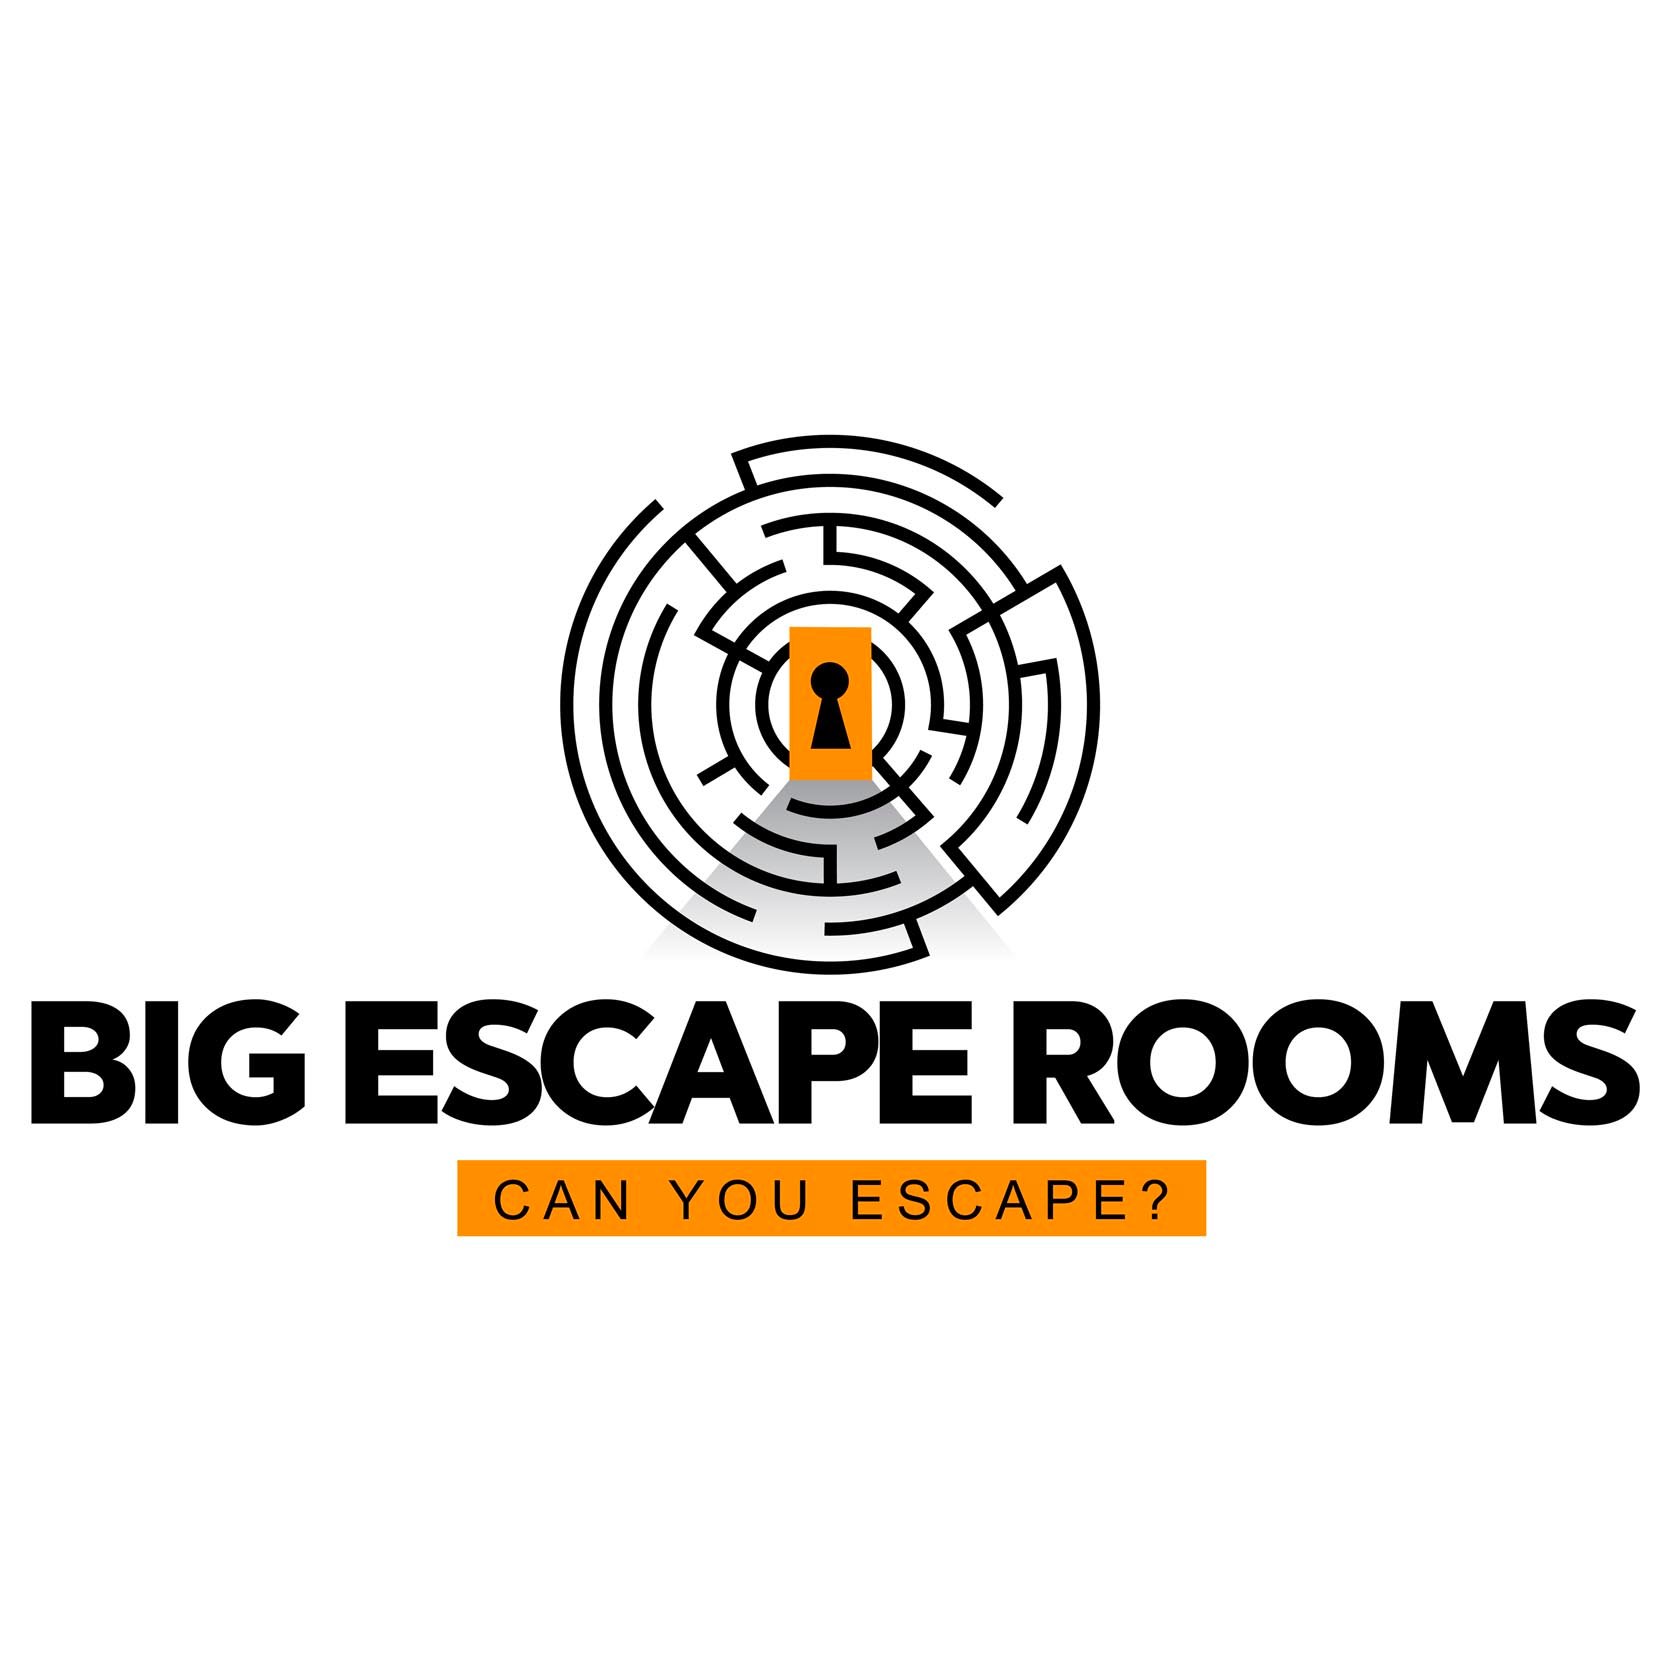 Atlanta's premier escape room facility located at 444 Highland Ave NE, #415. Come visit us today and try our immersive & fun packed rooms! Can you escape?